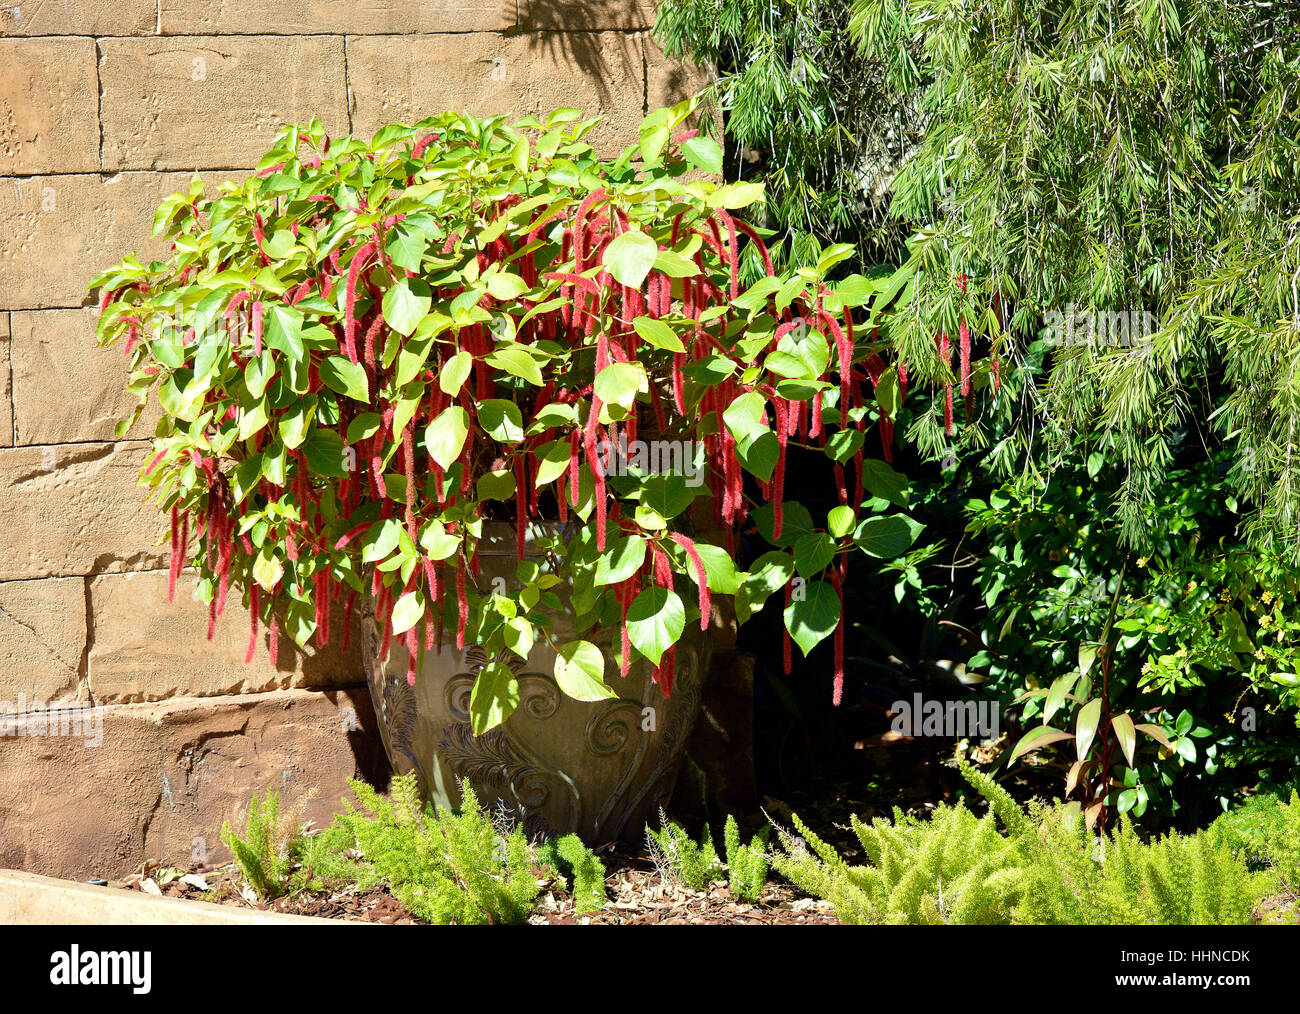 Red-hot cat's tail Latin name Acalypha hispida Stock Photo